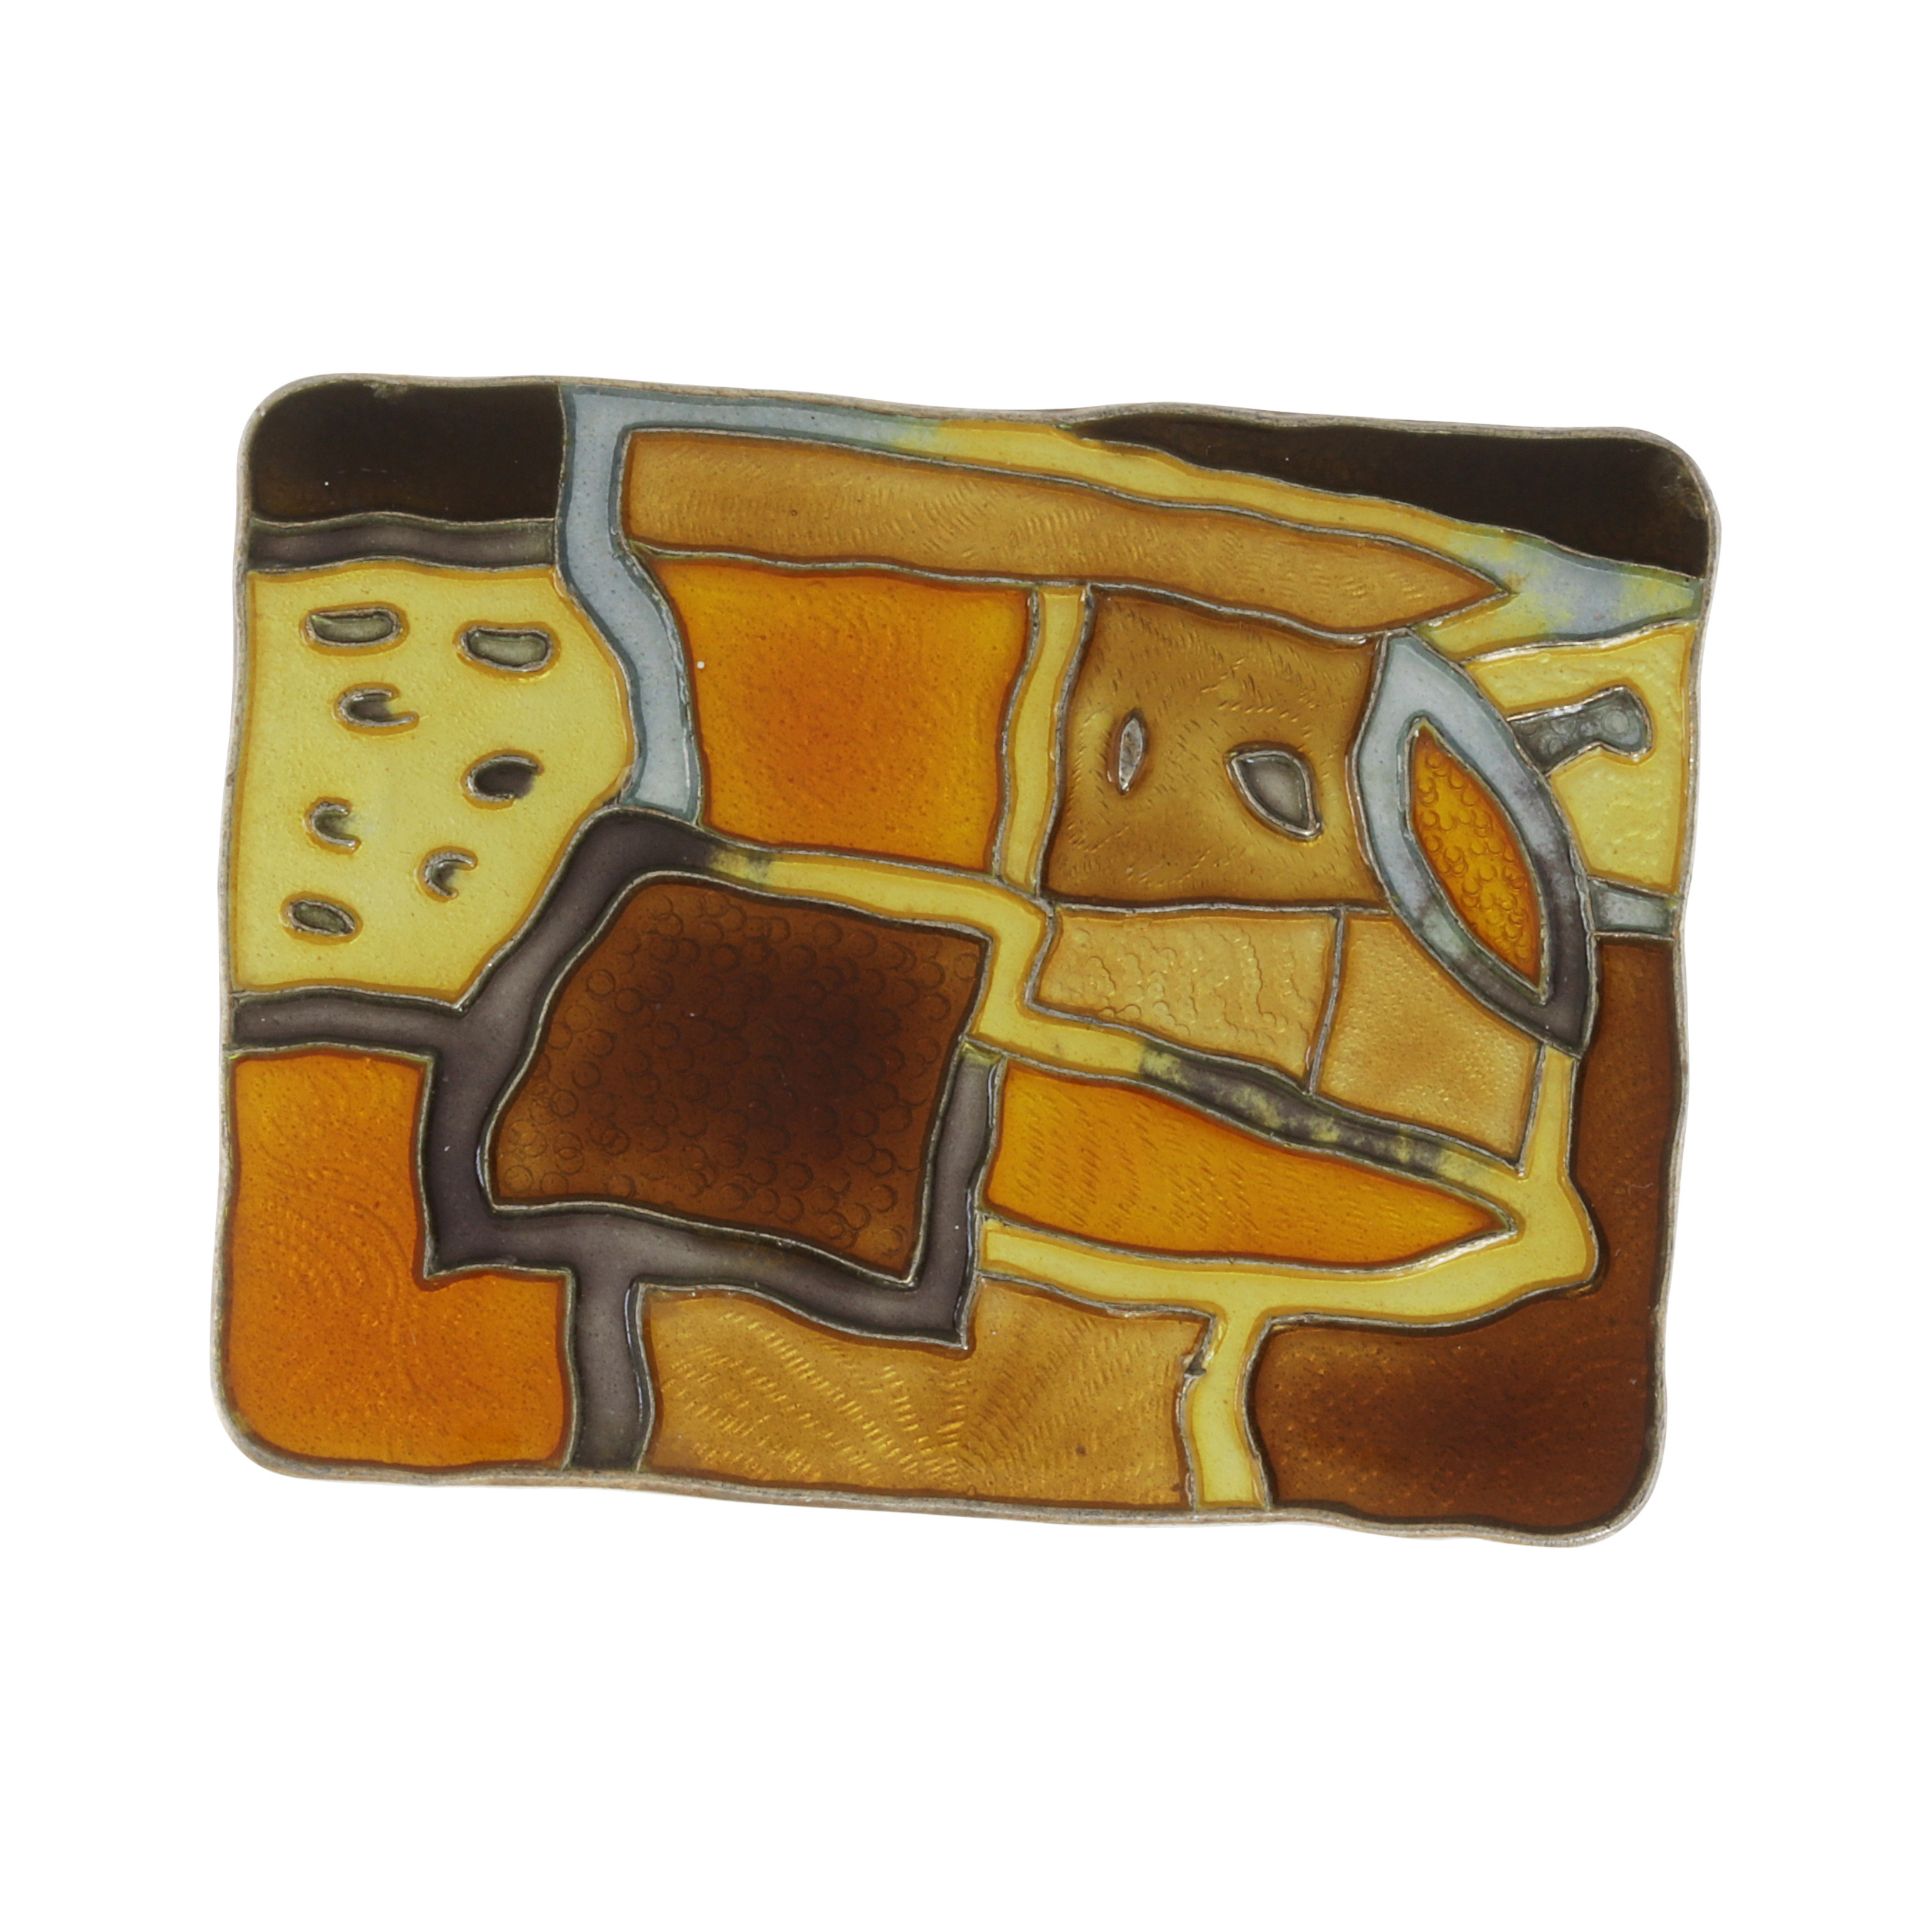 AN ANTIQUE ENAMEL BROOCH, DAVID ANDERSEN CIRCA 1930 in sterling silver, of rectangular form, the